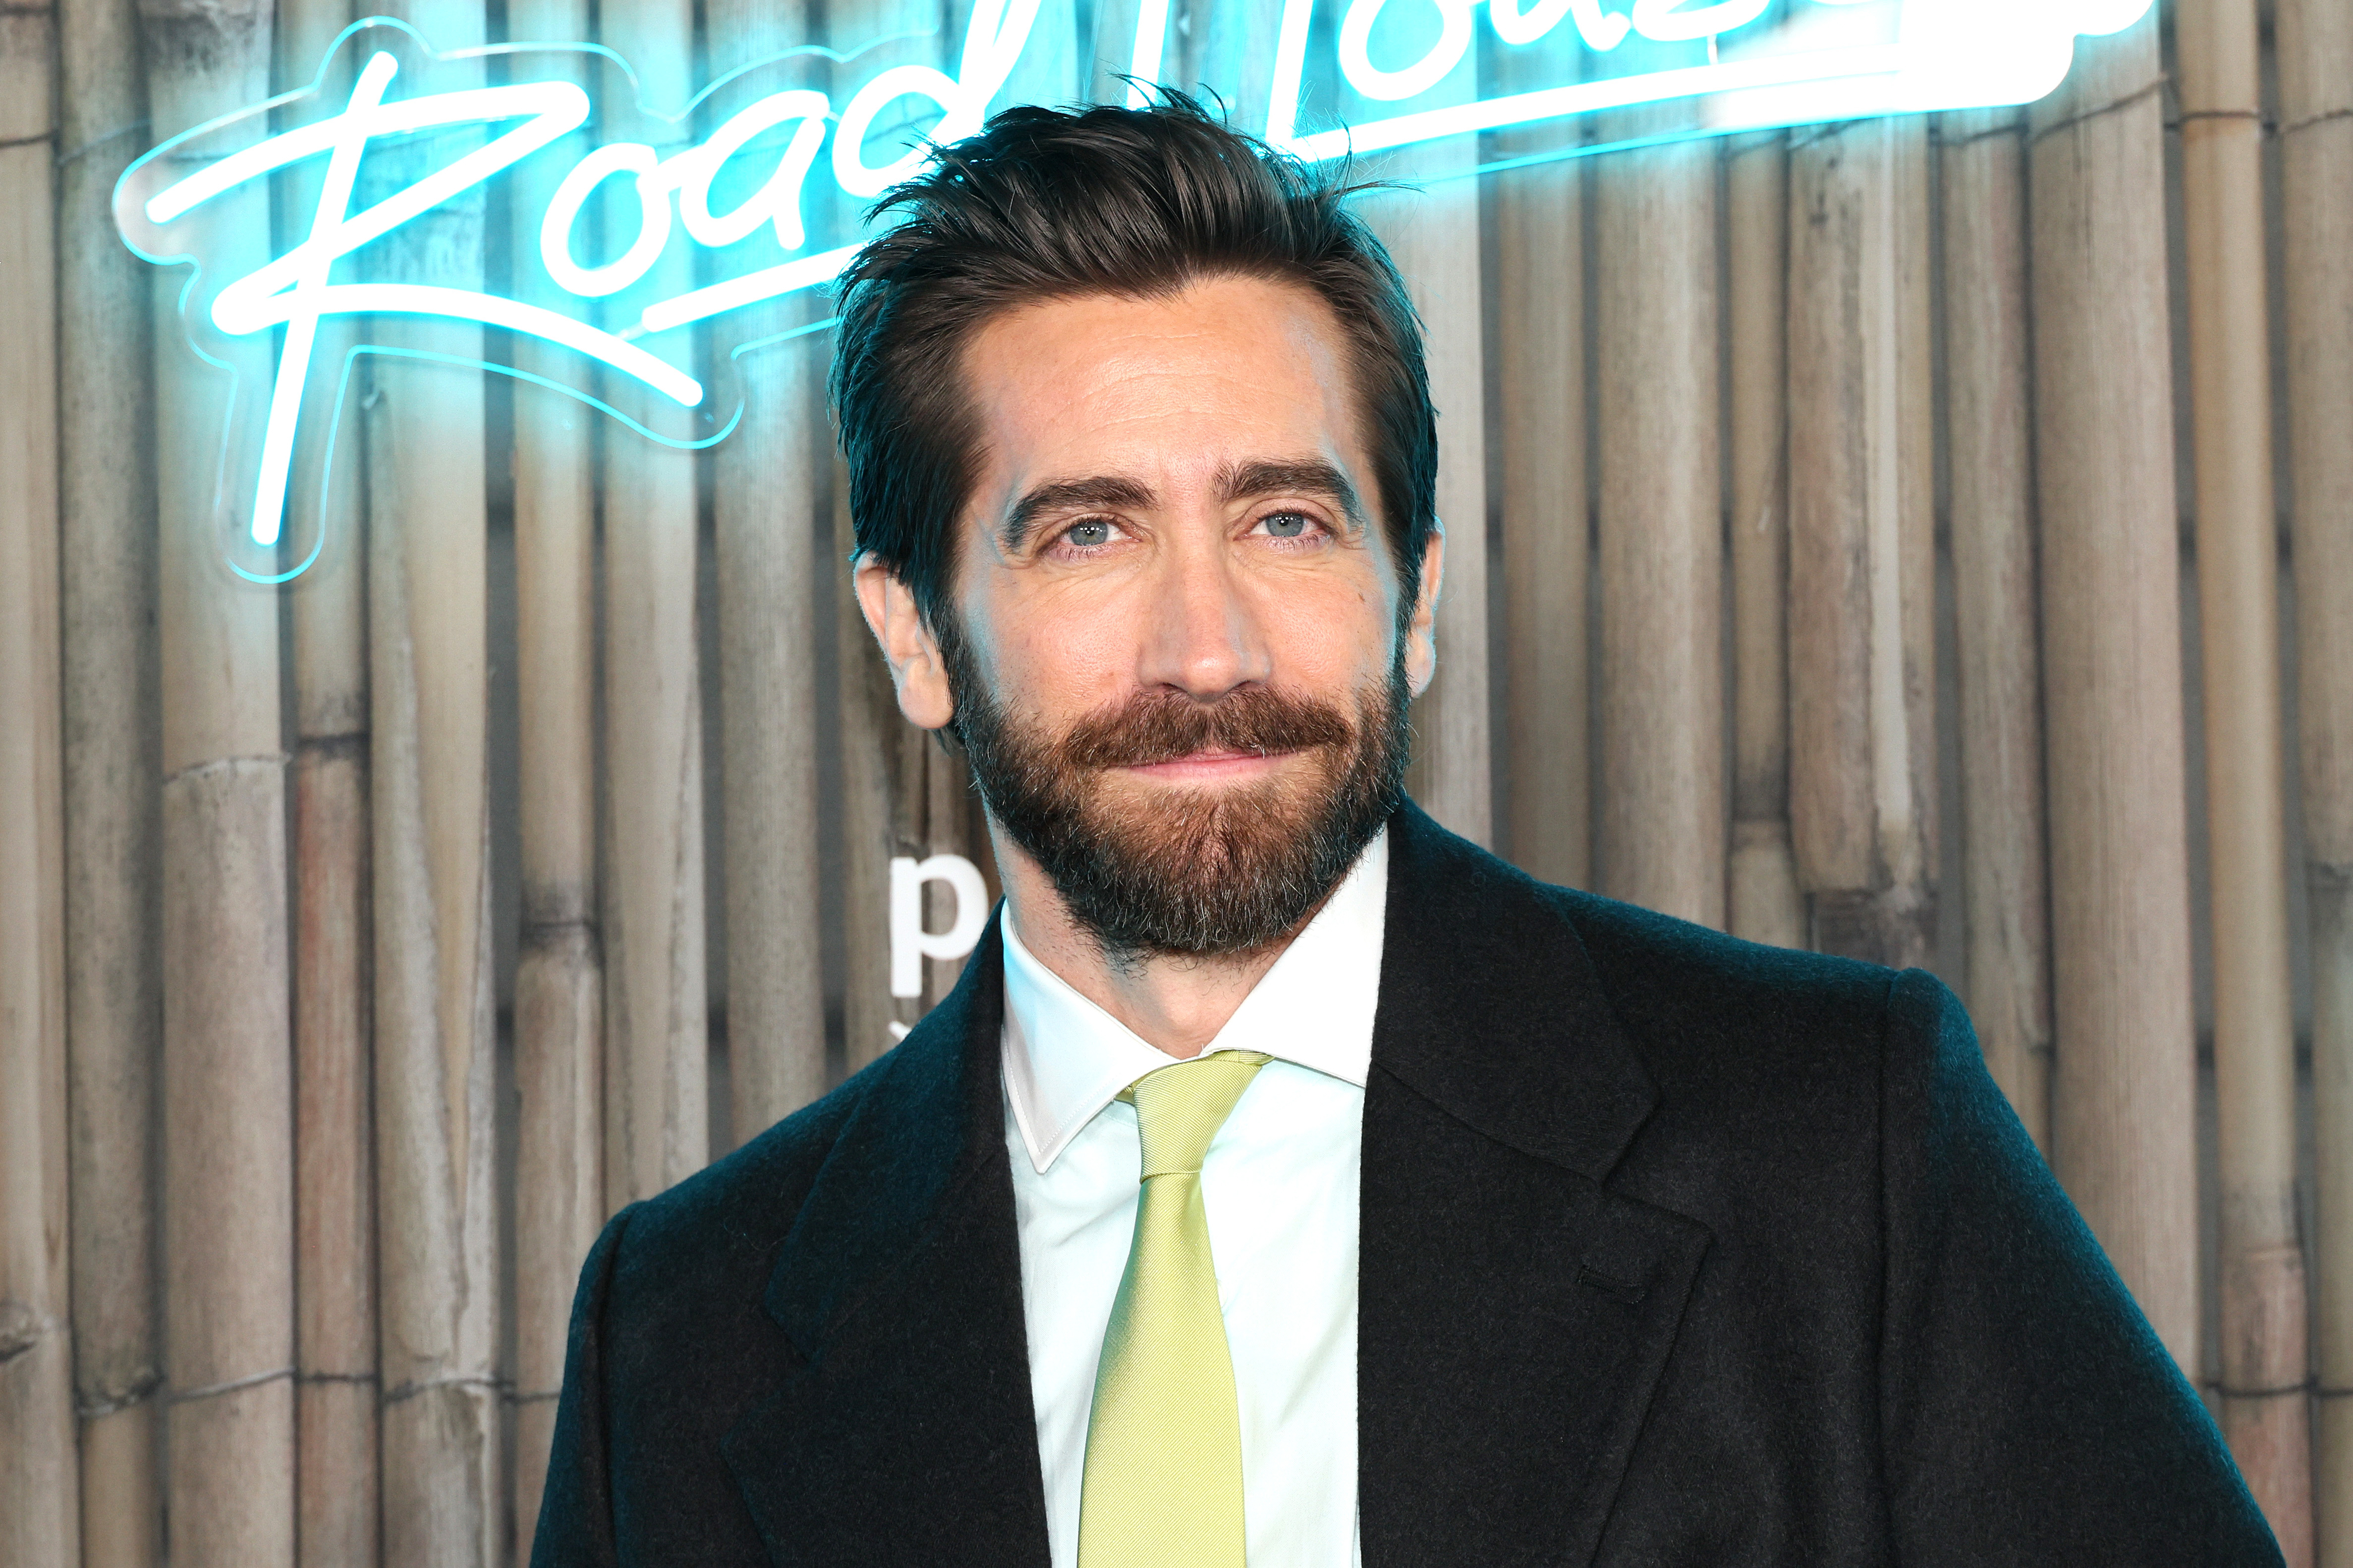 Jake Gyllenhaal wearing a classic suit at an event in front of a neon sign